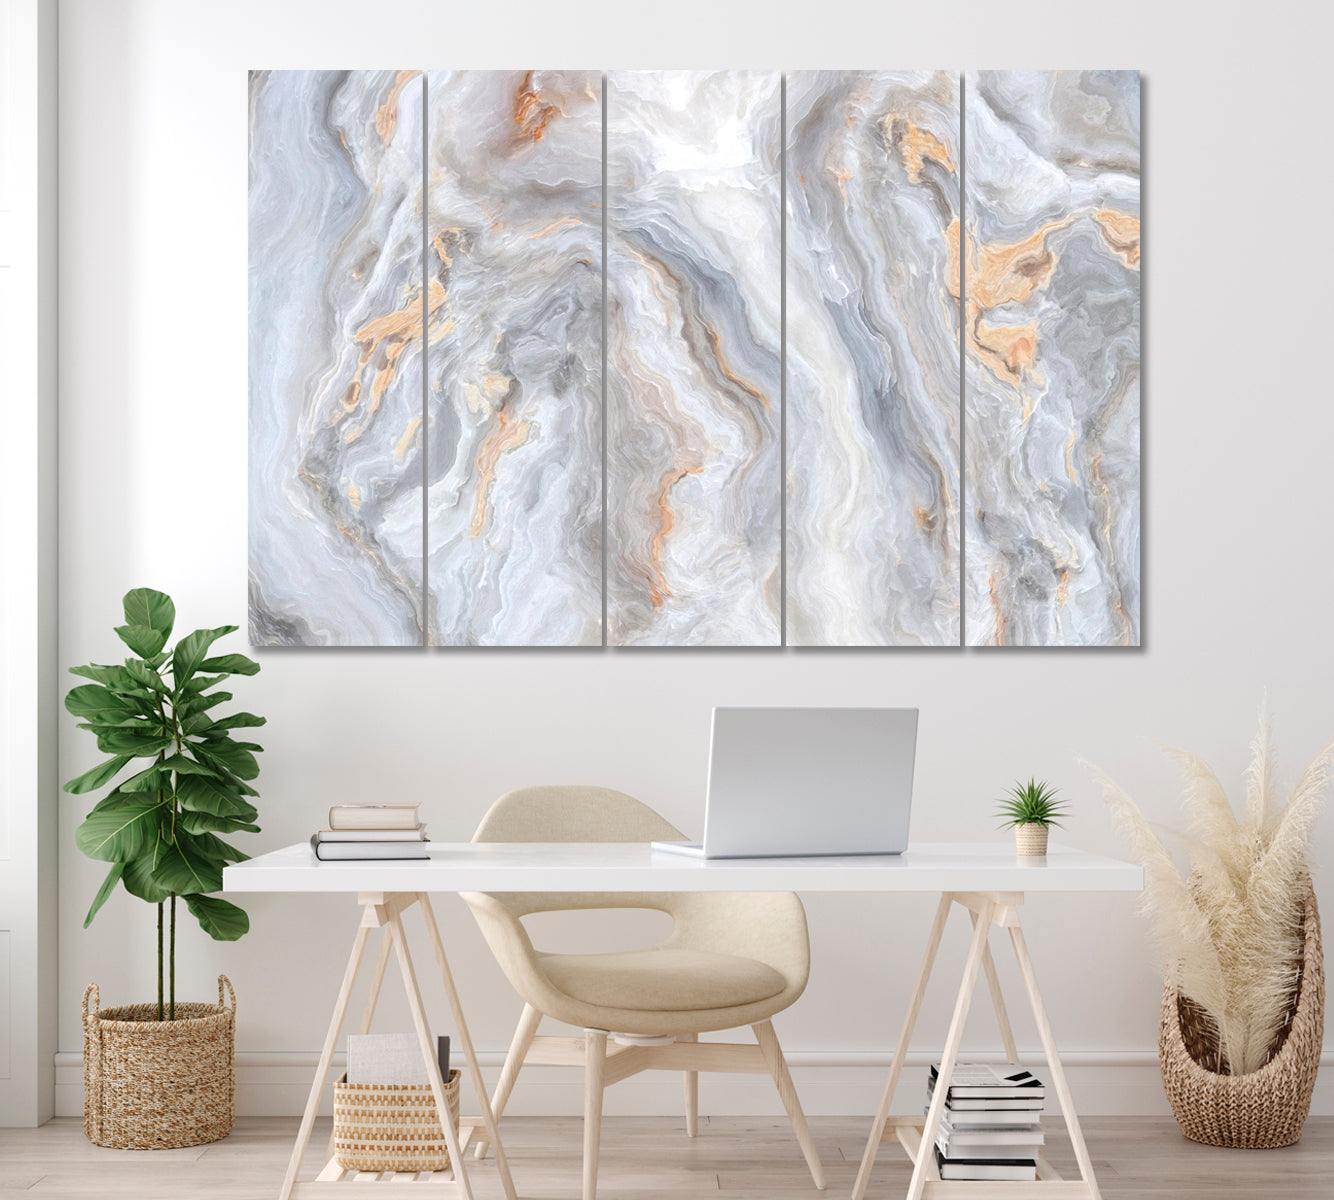 Abstract Grey Marble with Veins Canvas Print ArtLexy 5 Panels 36"x24" inches 